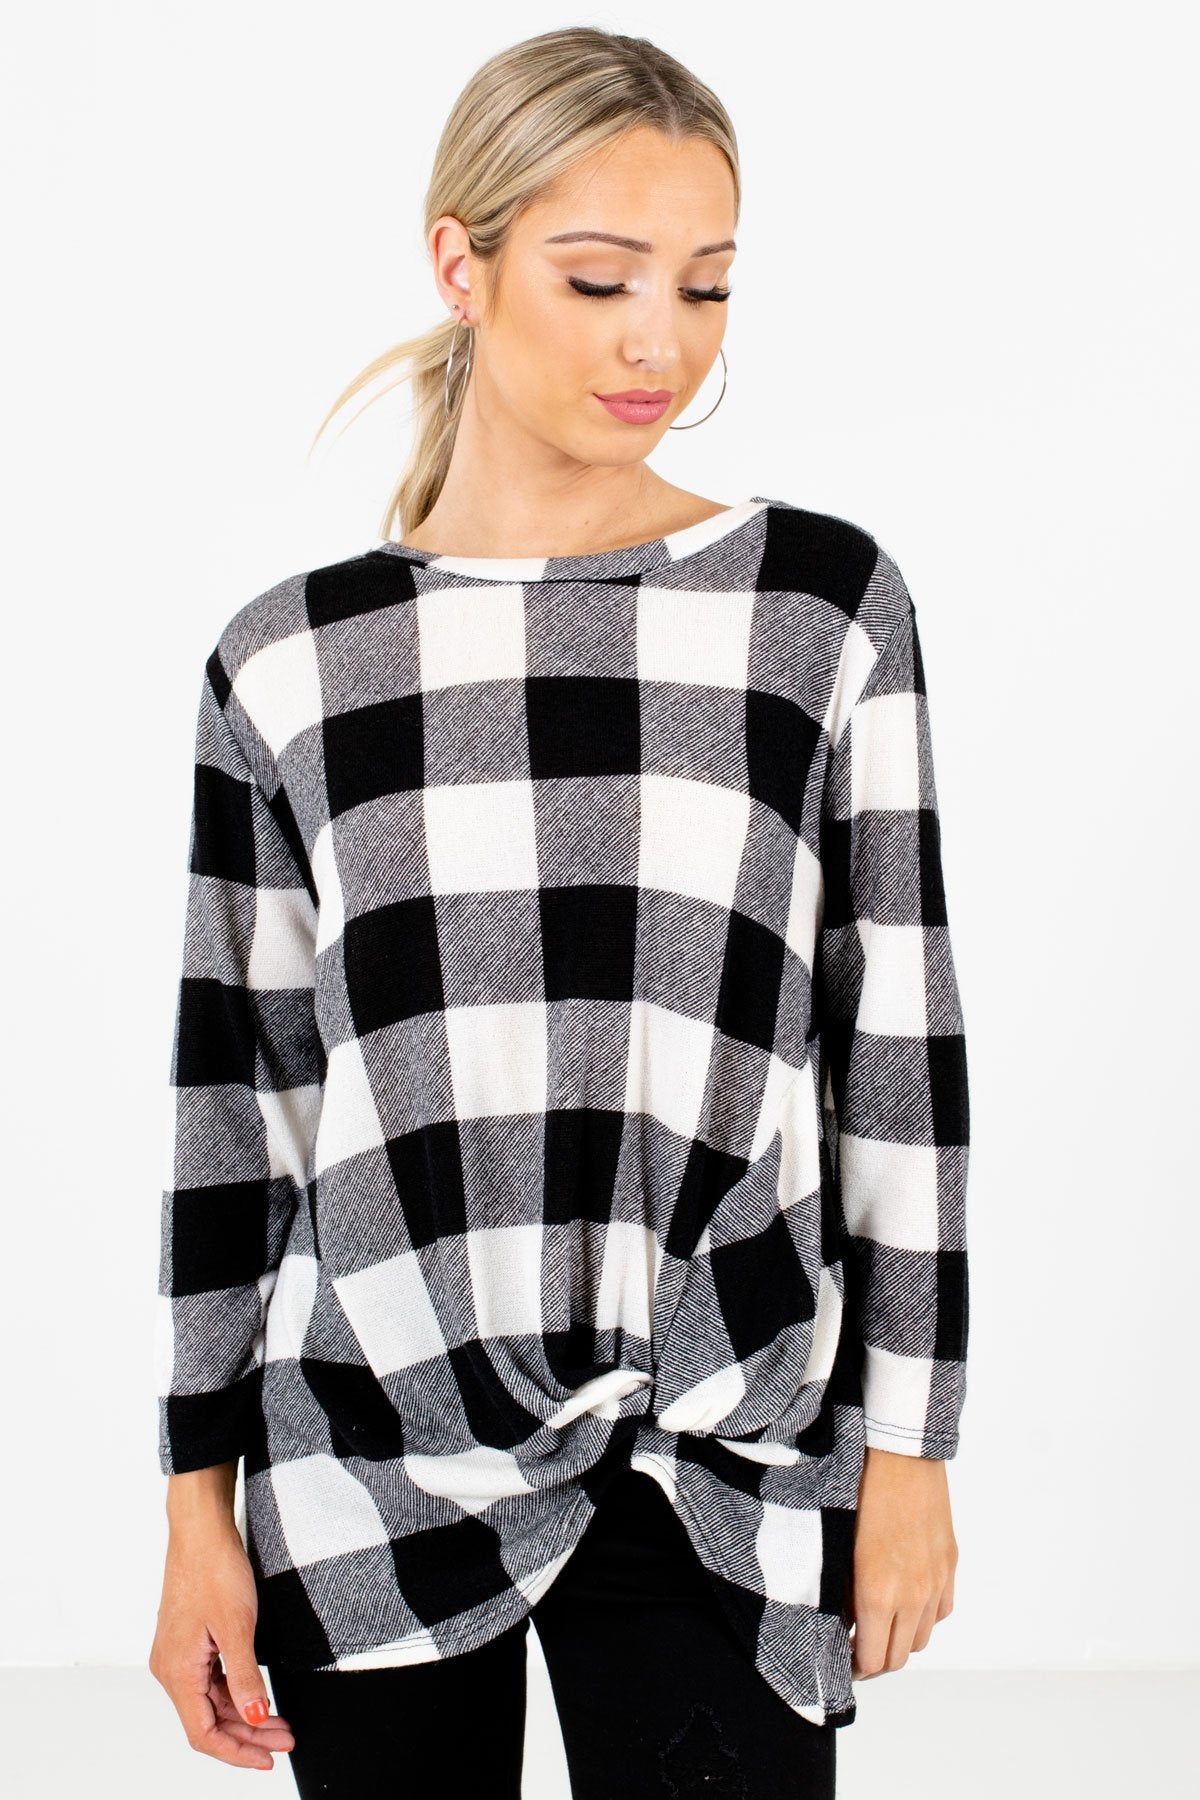 Black and White Plaid Patterned Boutique Tops for Women